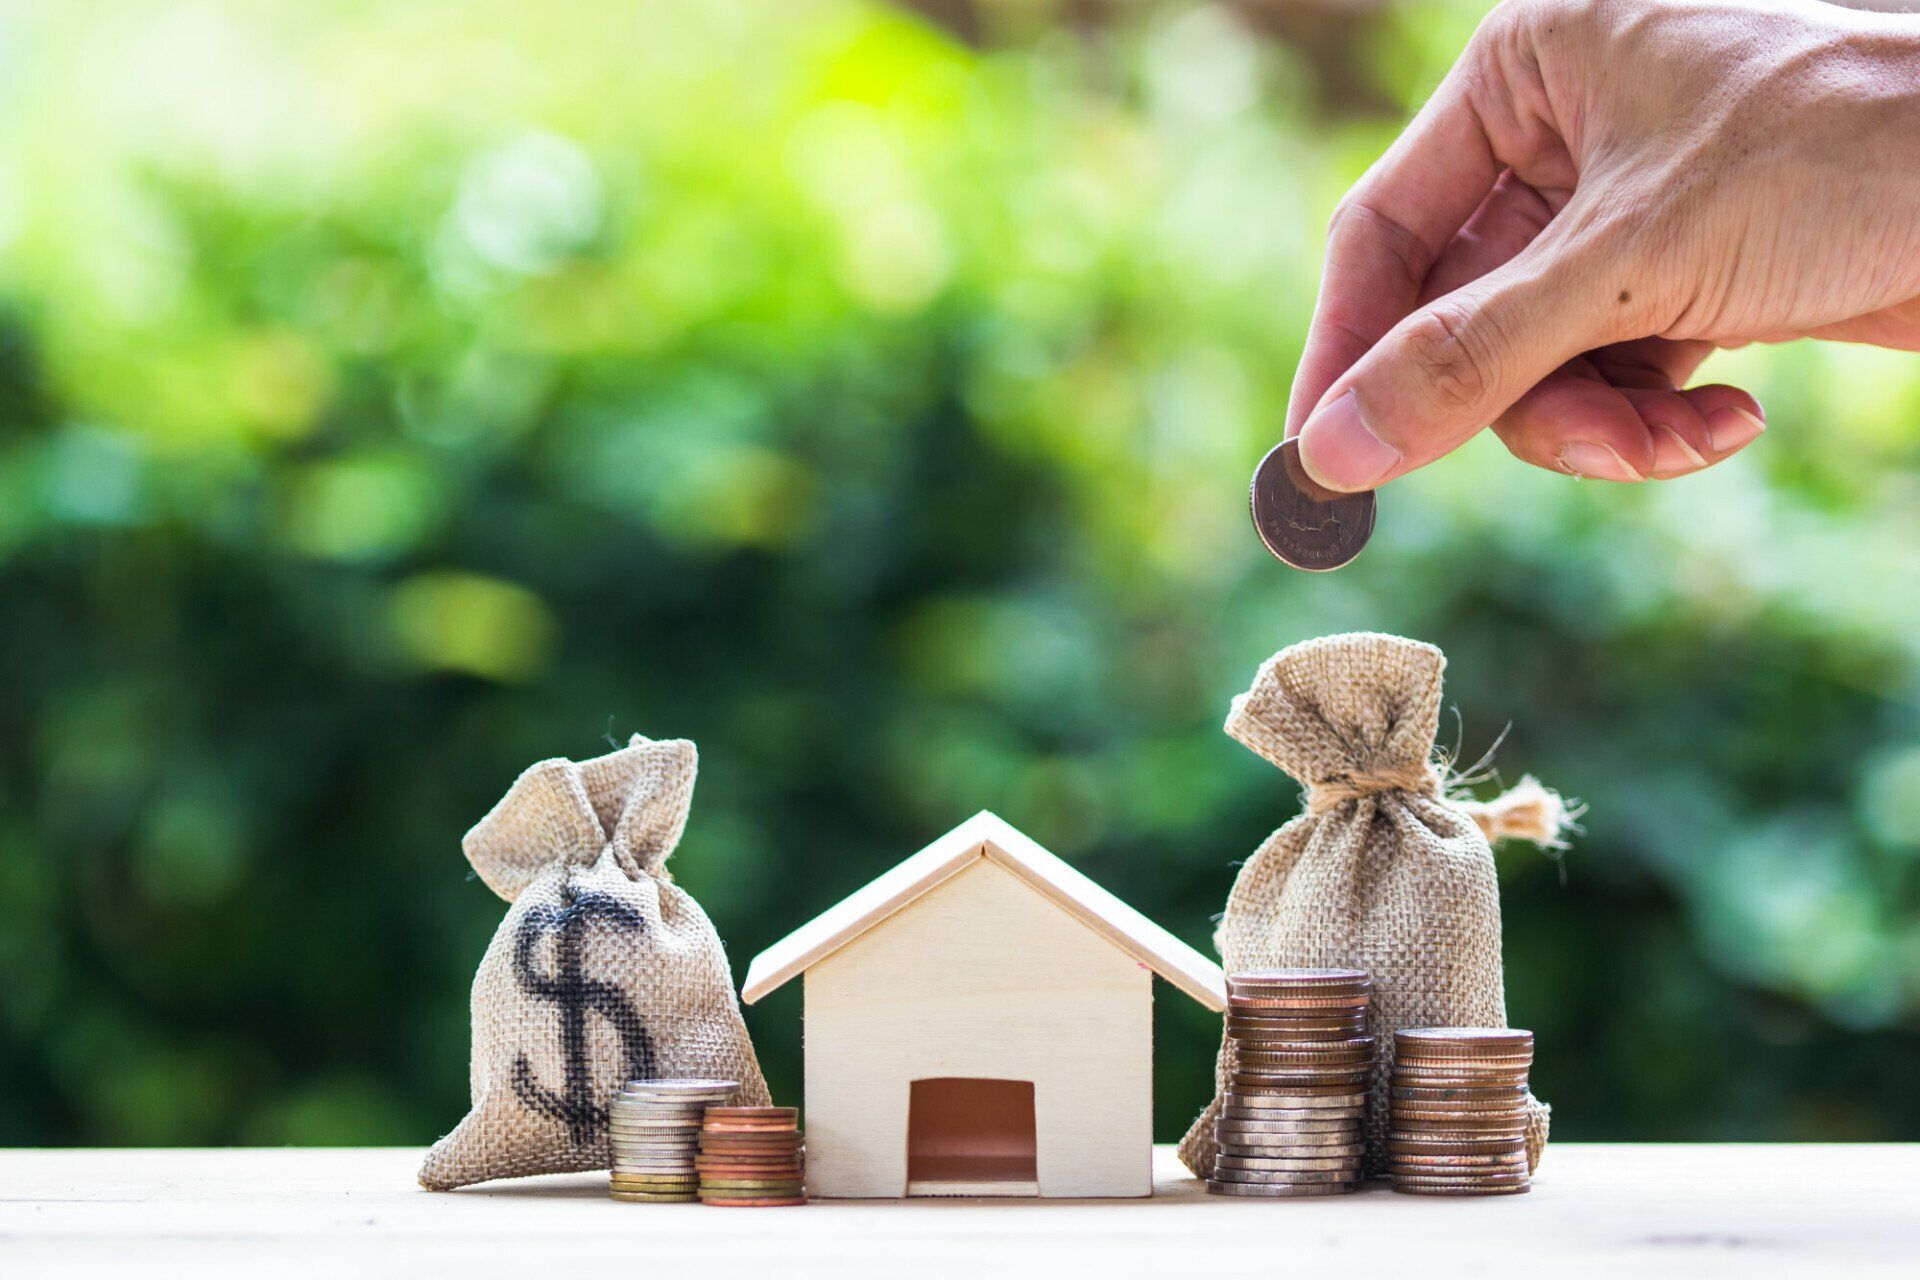 what is a home equity loan